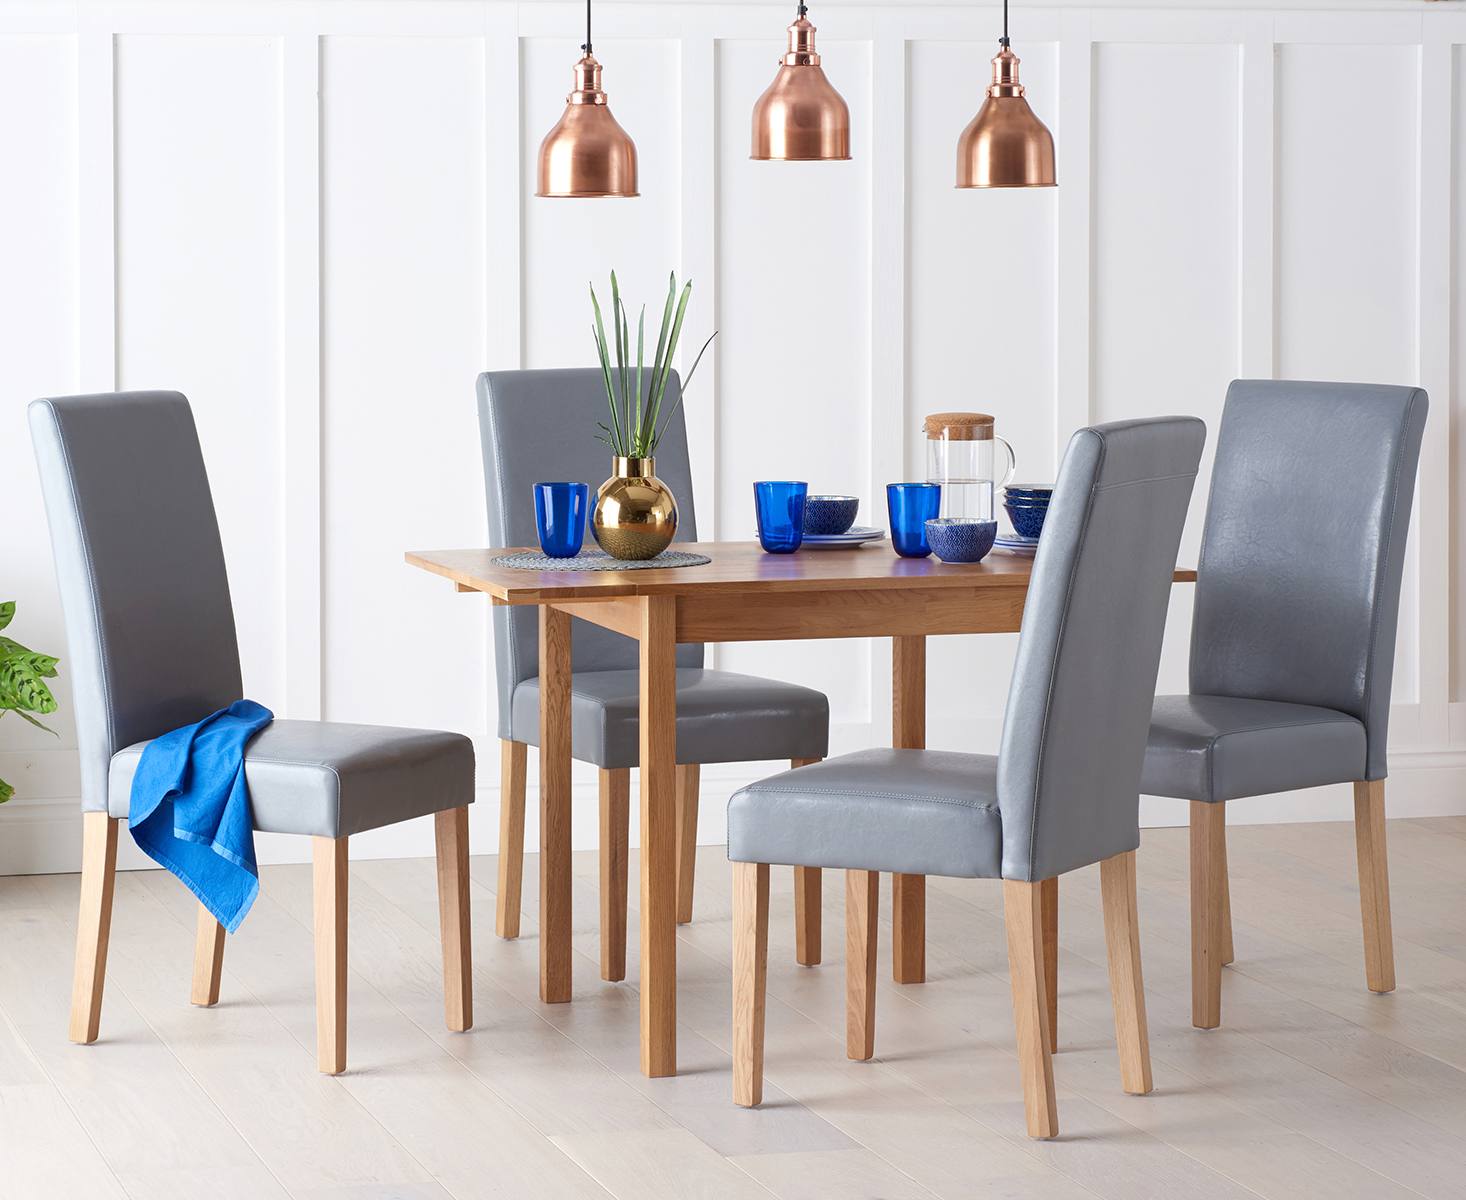 Extending York 70cm Solid Oak Dining Table With 2 Grey Olivia Chairs